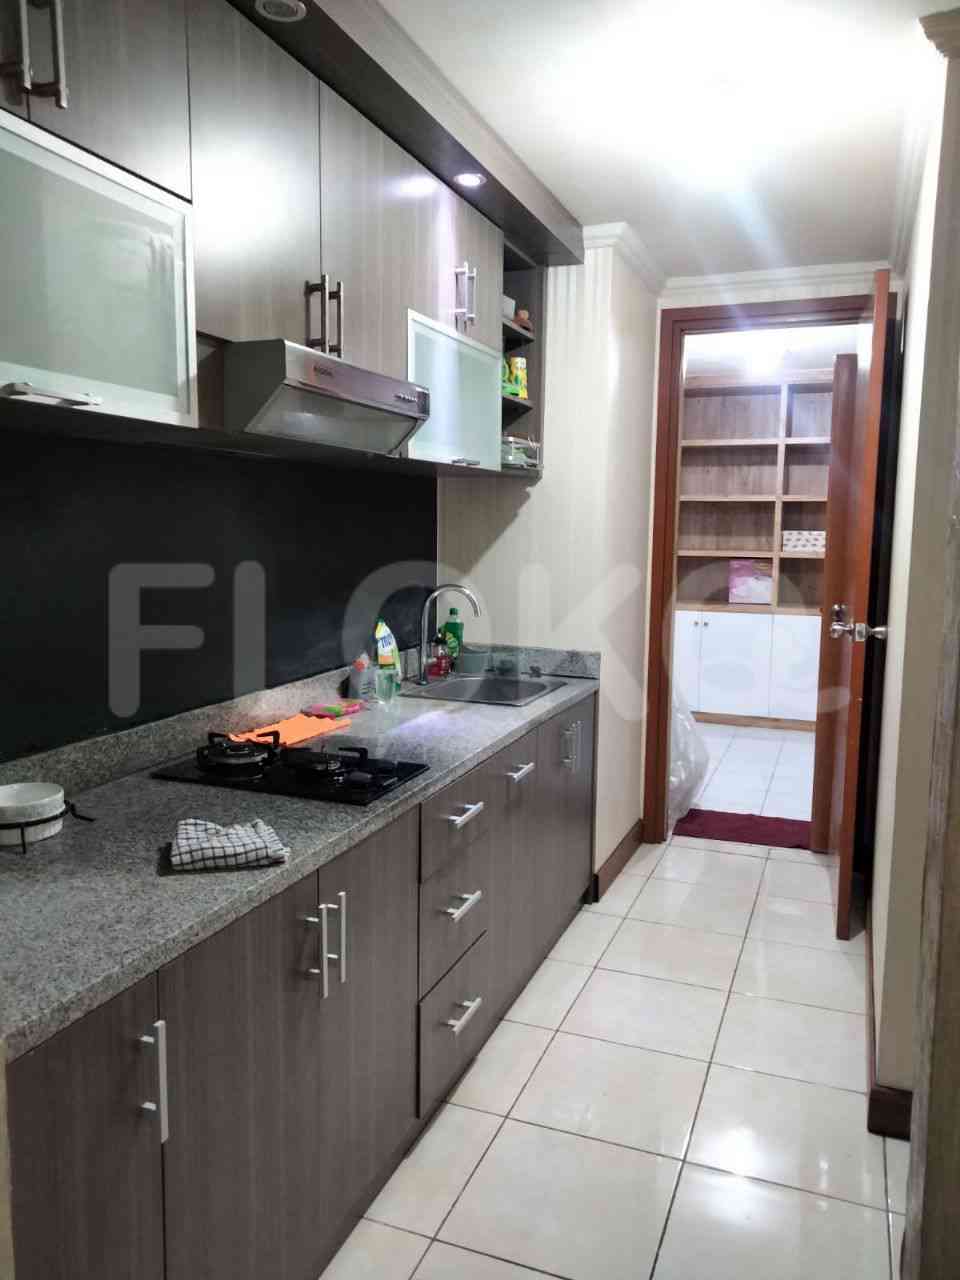 4 Bedroom on 12th Floor for Rent in Grand Palace Kemayoran - fke369 4